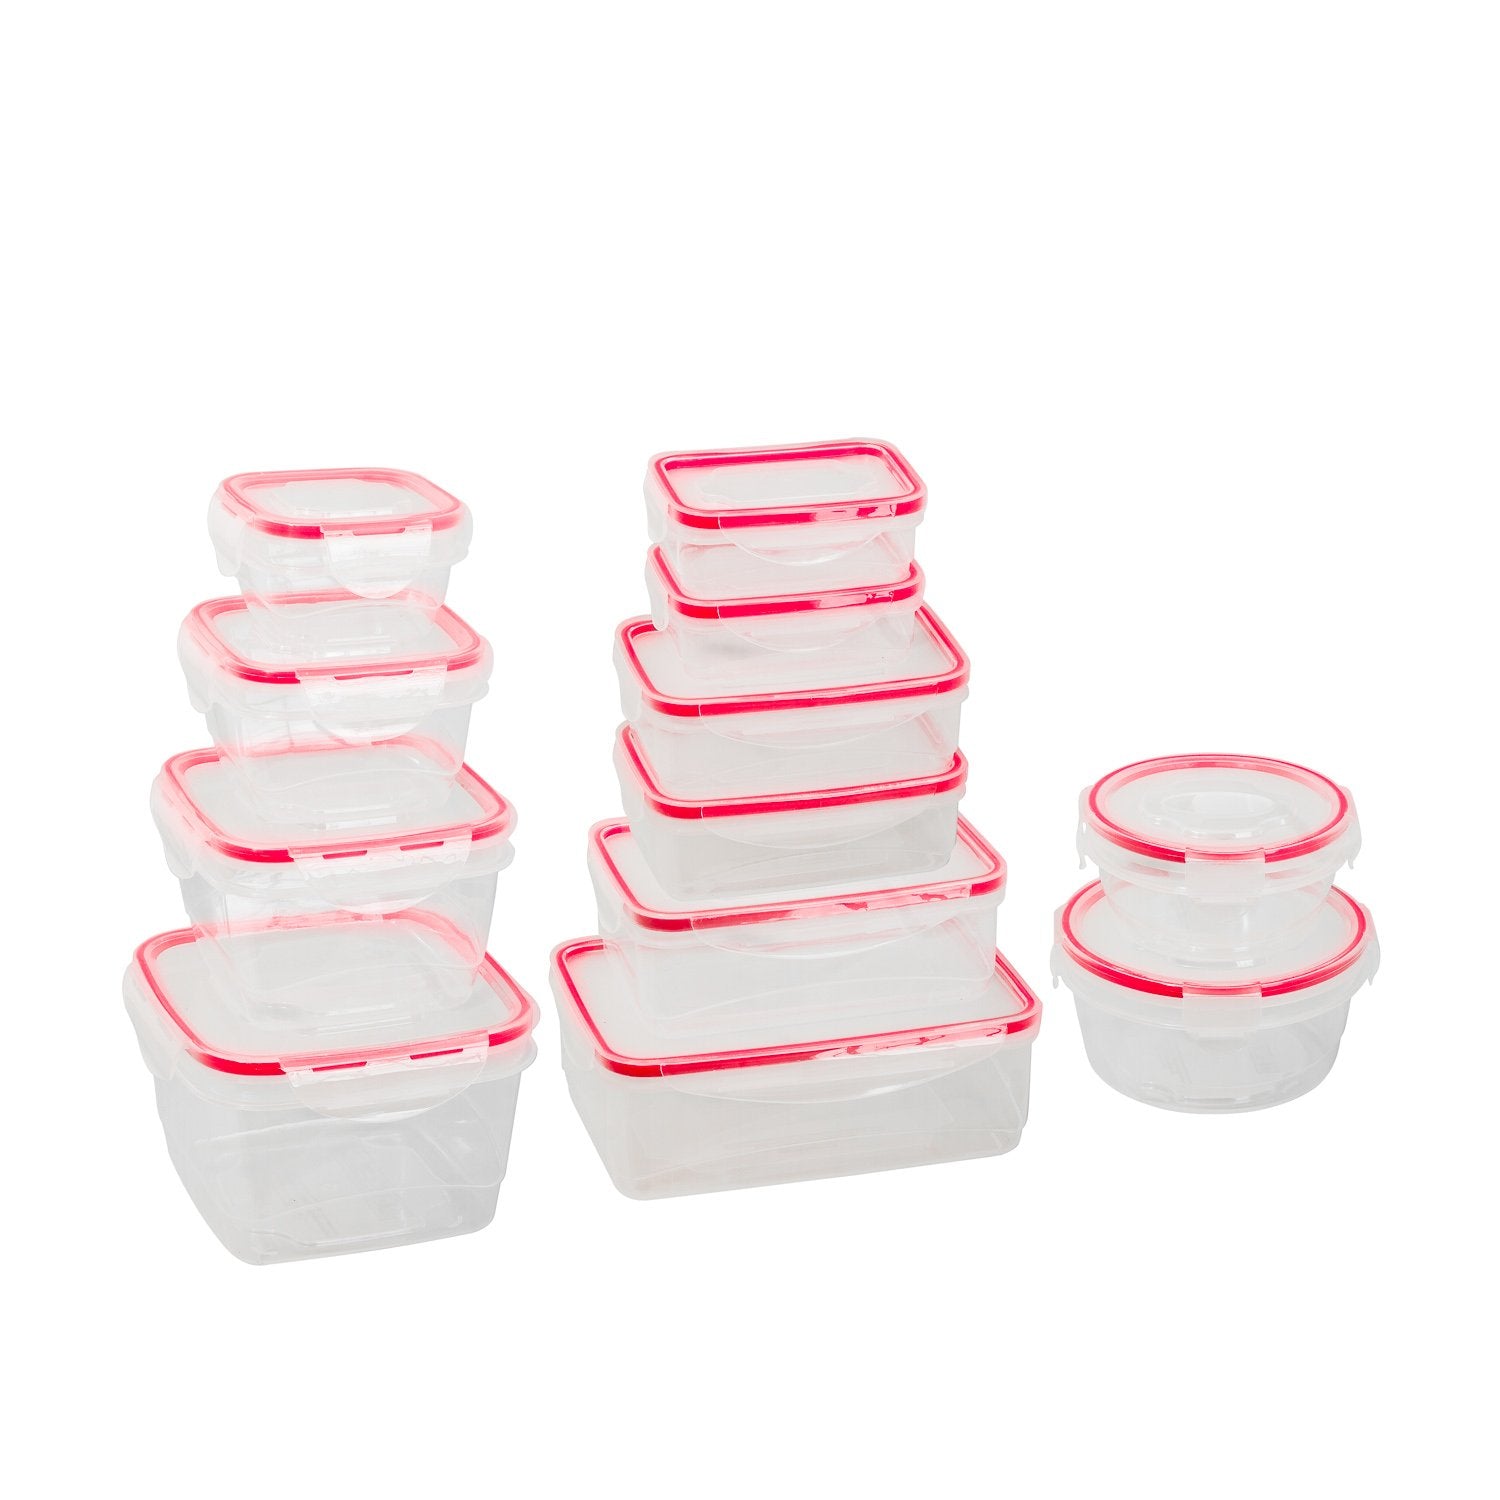 24 Pc Reusable Kitchen Containers w/Vented Lids - Plastic Food Containers - School Office Work Microwavable Containers (Red Lids)